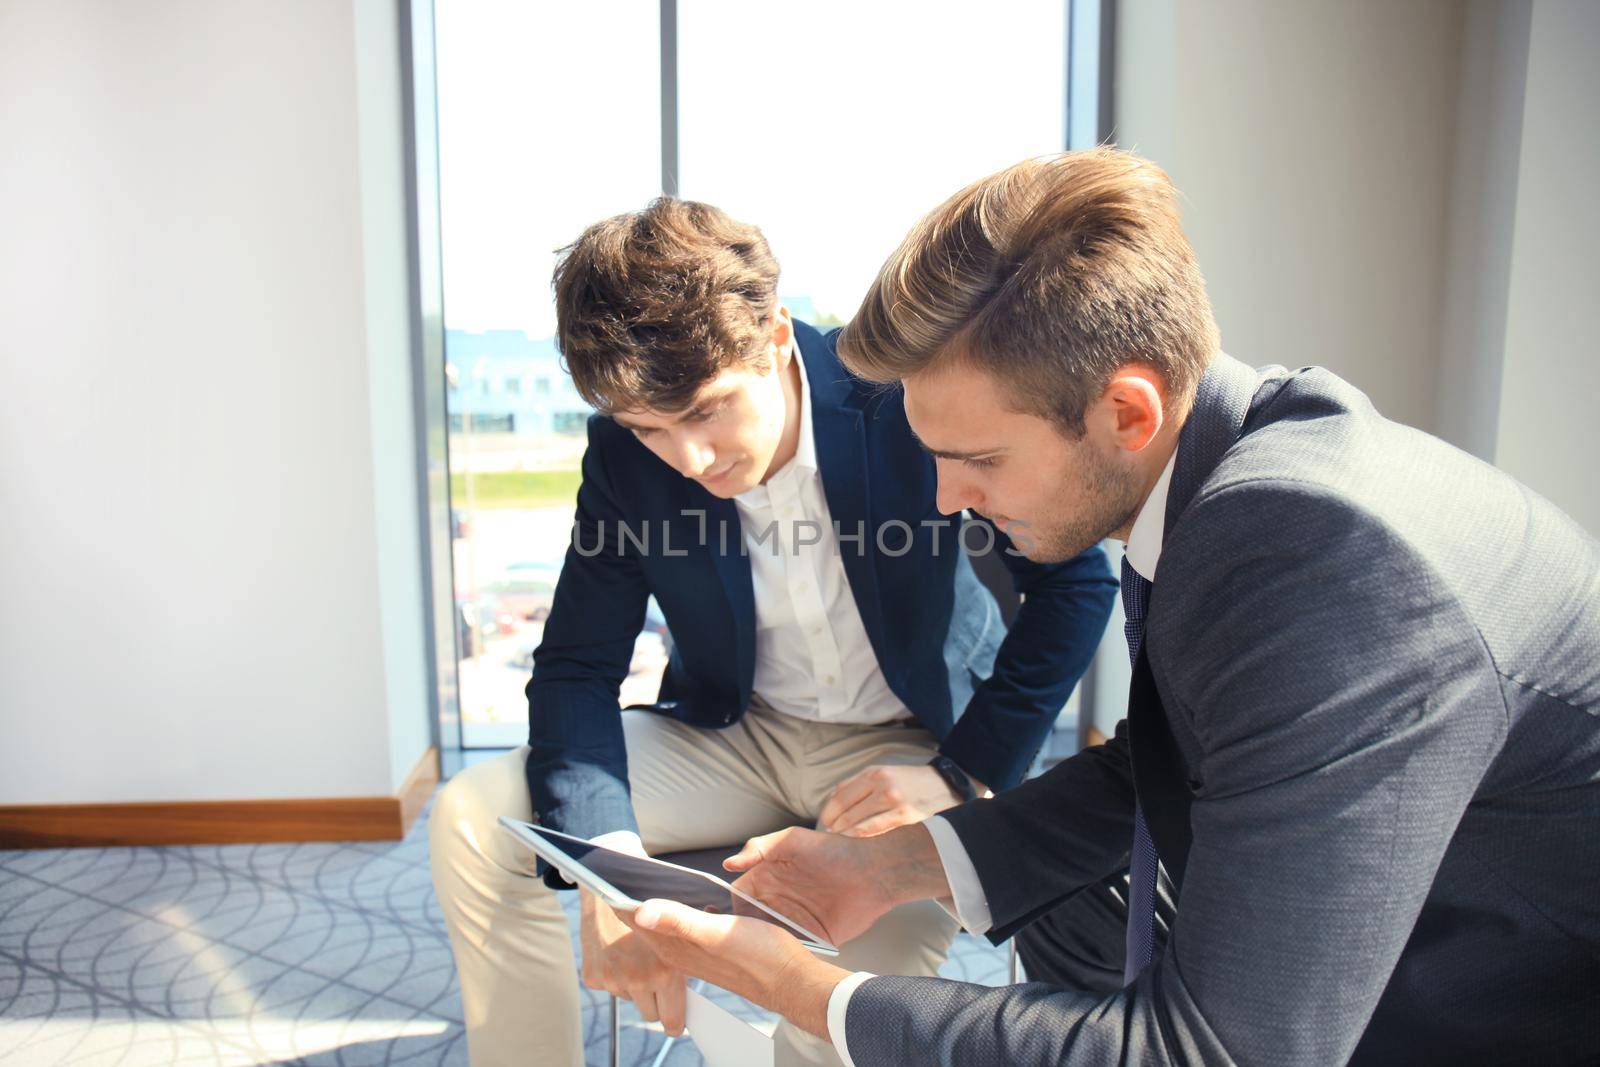 Mature businessman using a digital tablet to discuss information with a younger colleague in a modern business office.